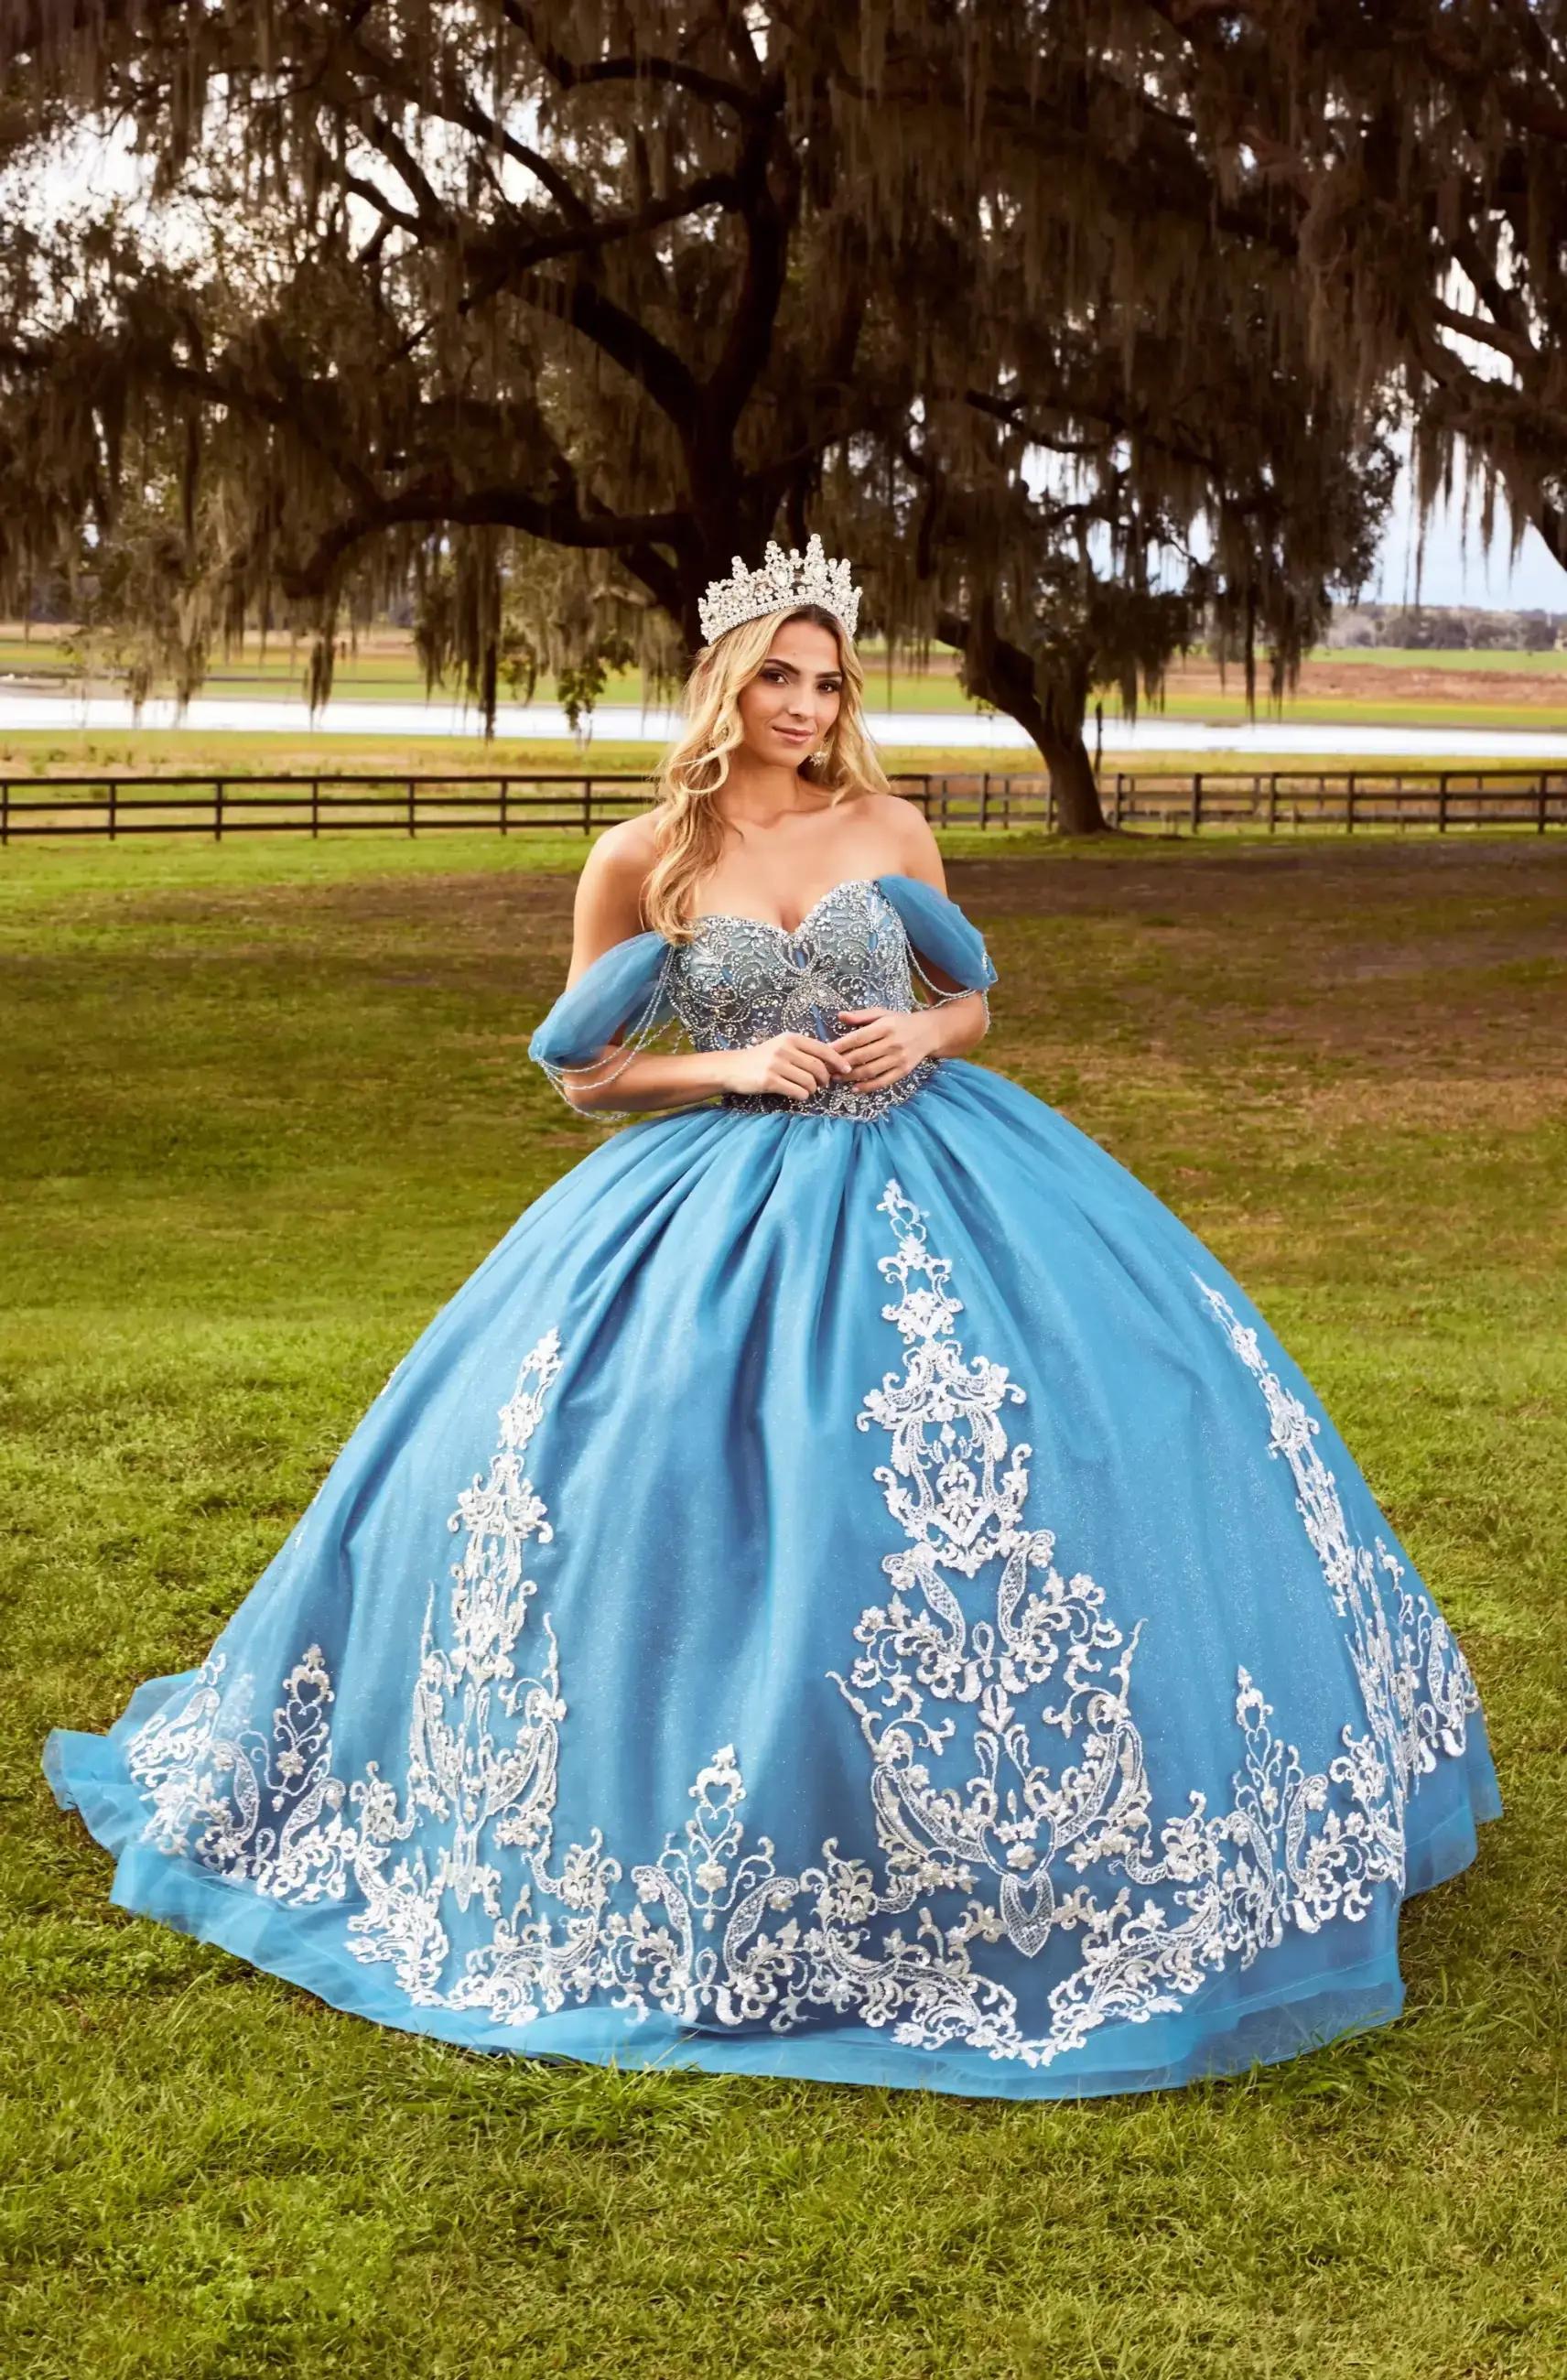 Model wearing an quince dresses